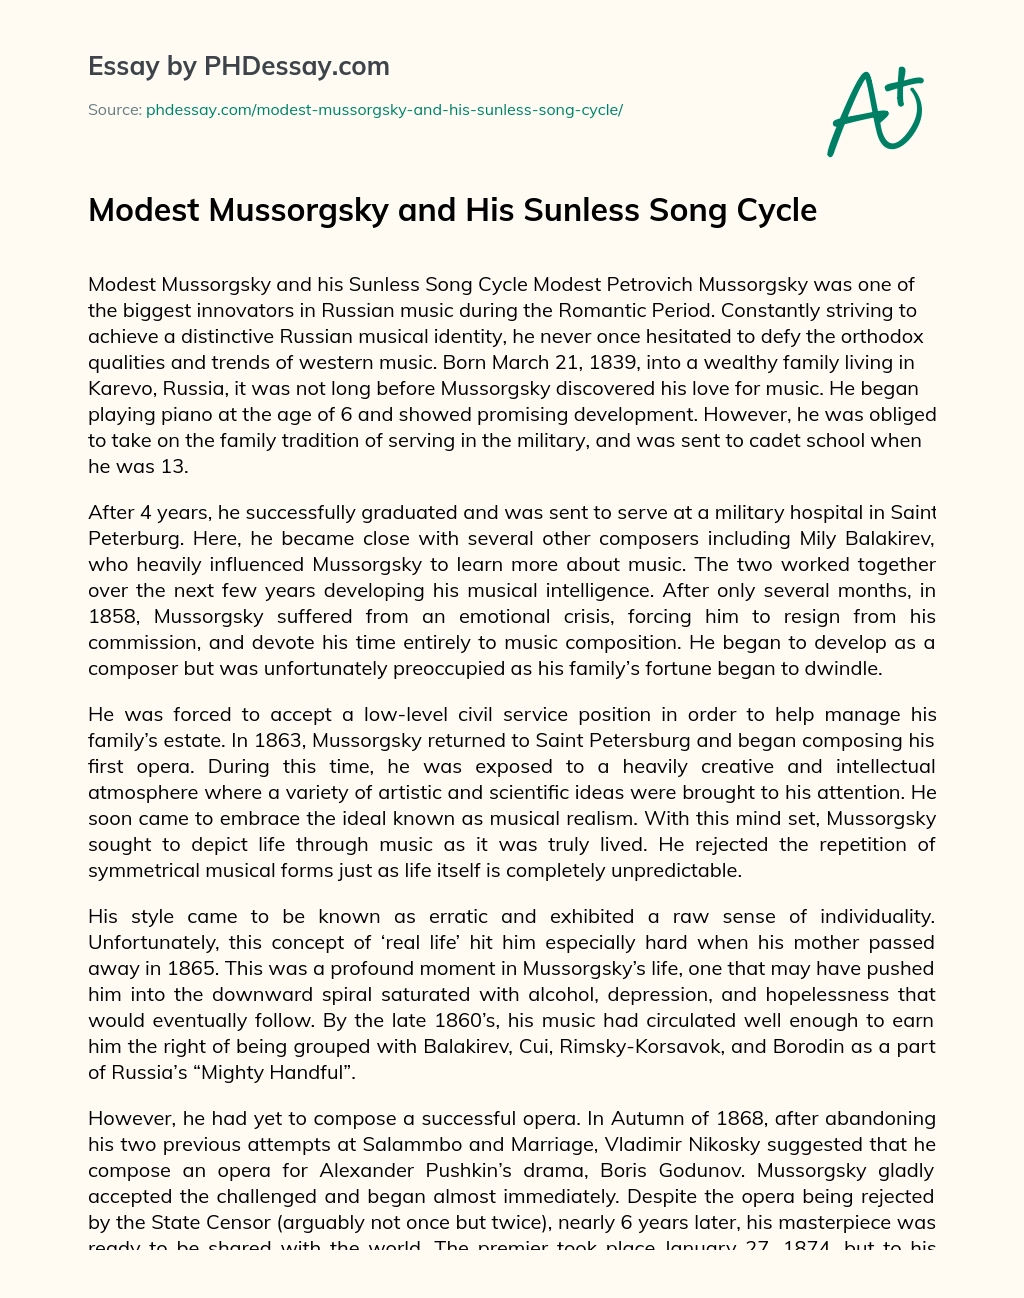 Modest Mussorgsky and His Sunless Song Cycle essay